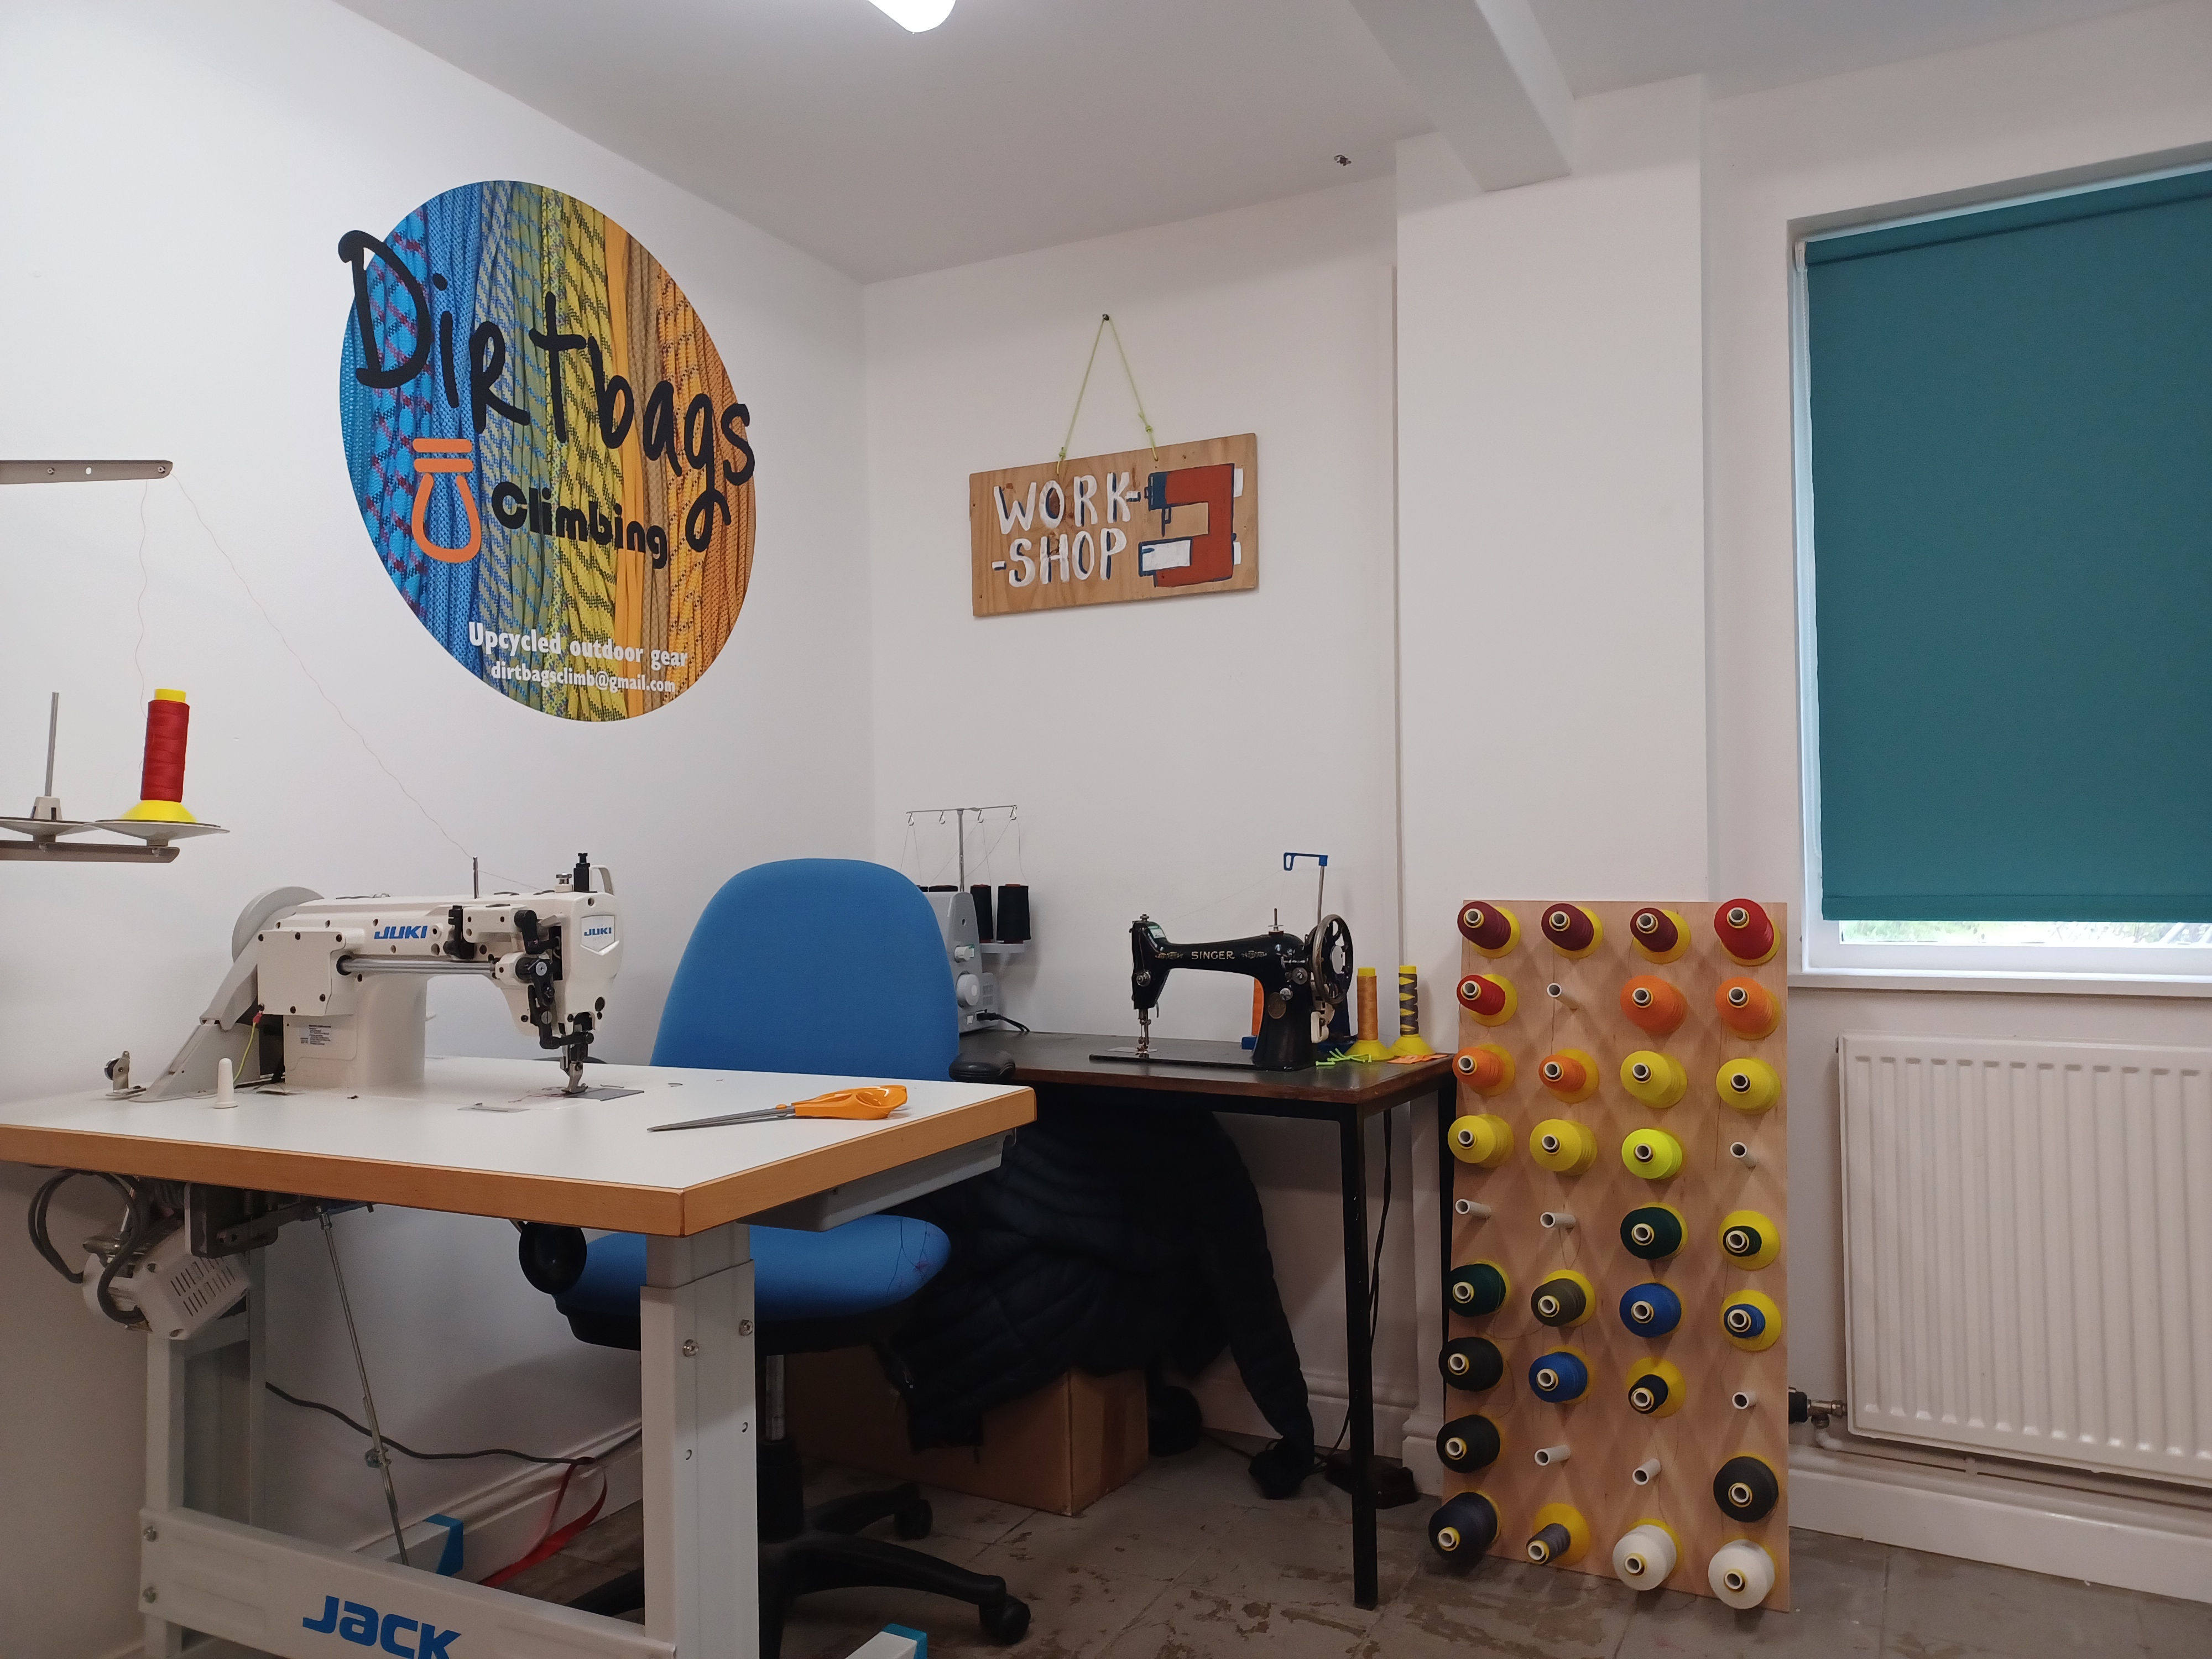 A corner of a workshop, with a sewing machine and an empty chair. A 'dirtbags climbing' sign is on the wall